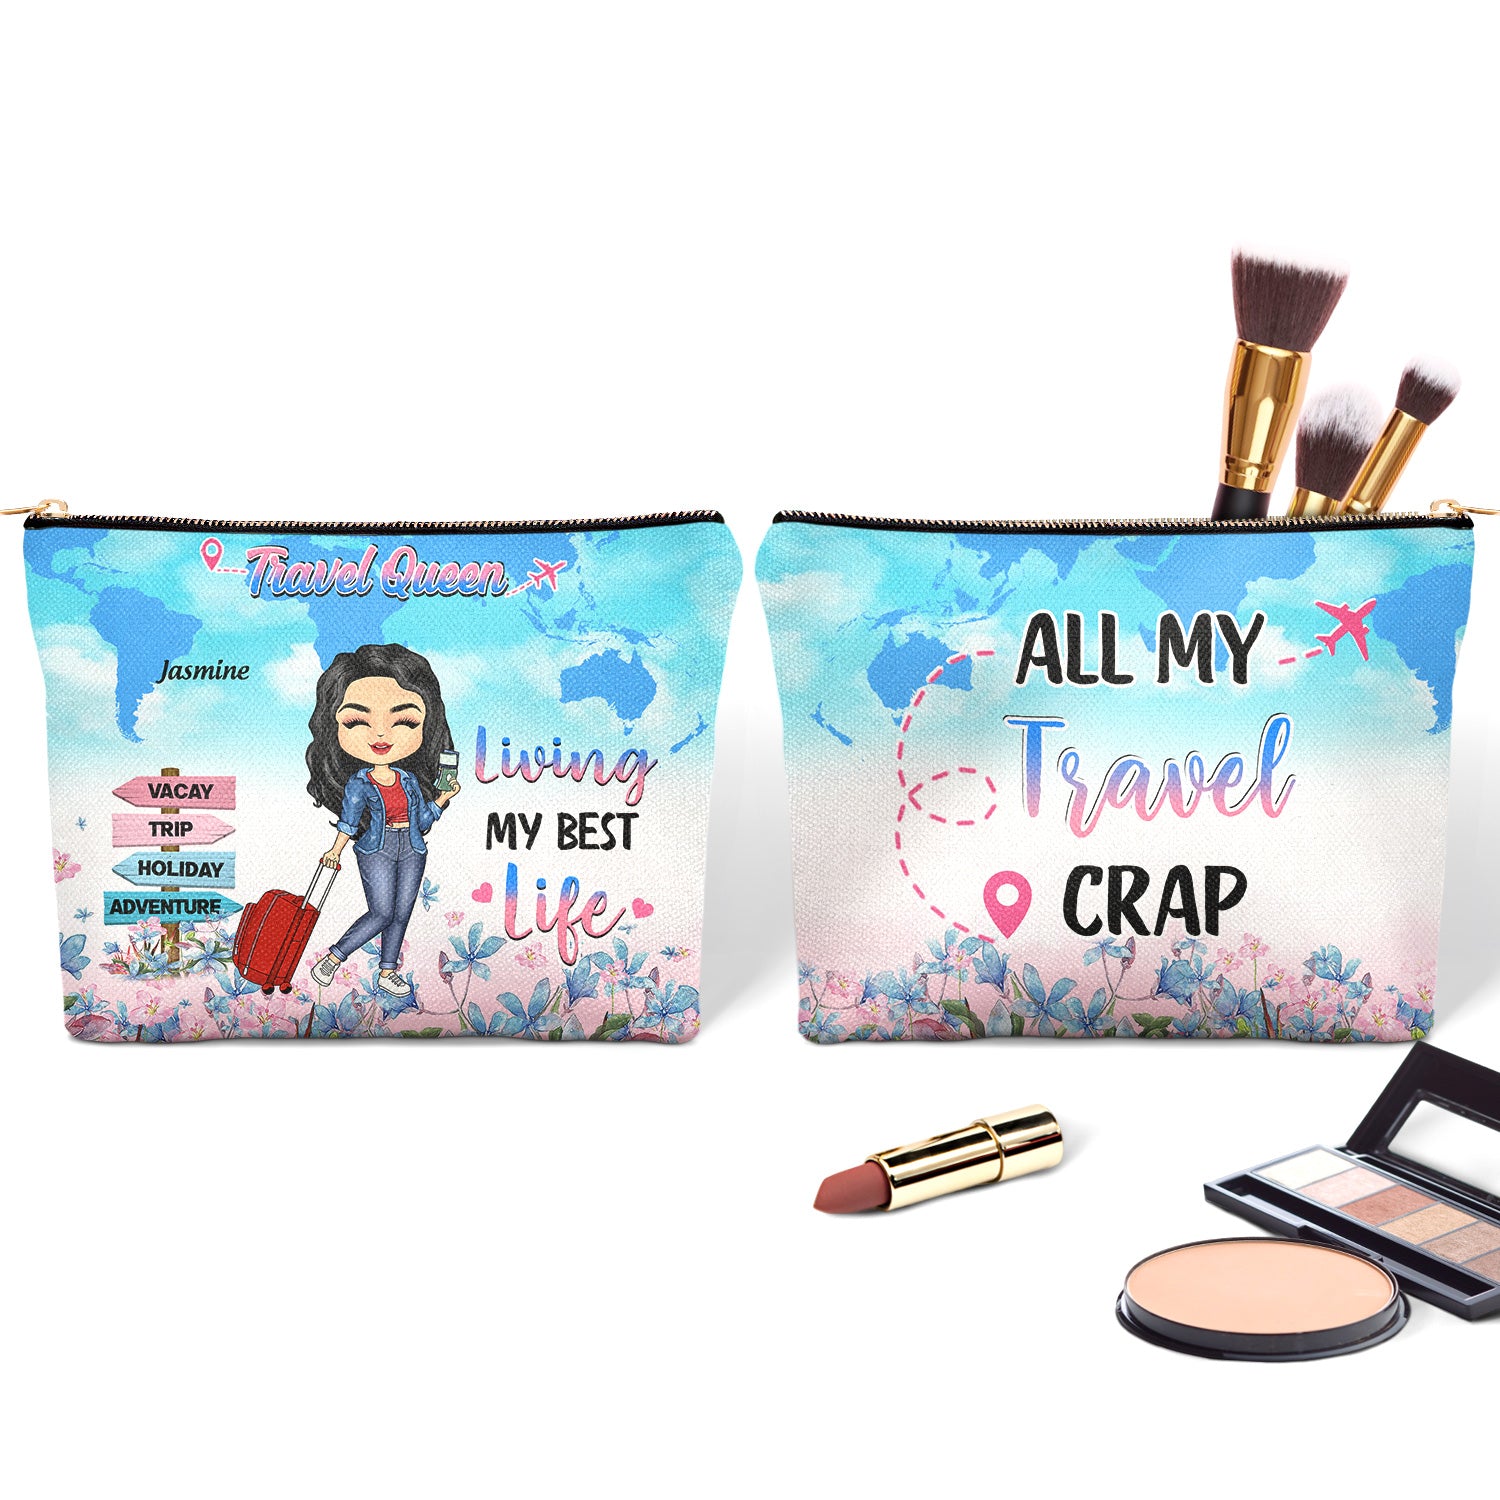 Travel Queen Living My Best Life - Gift For Travel Lovers, Travelers - Personalized Cosmetic Bag